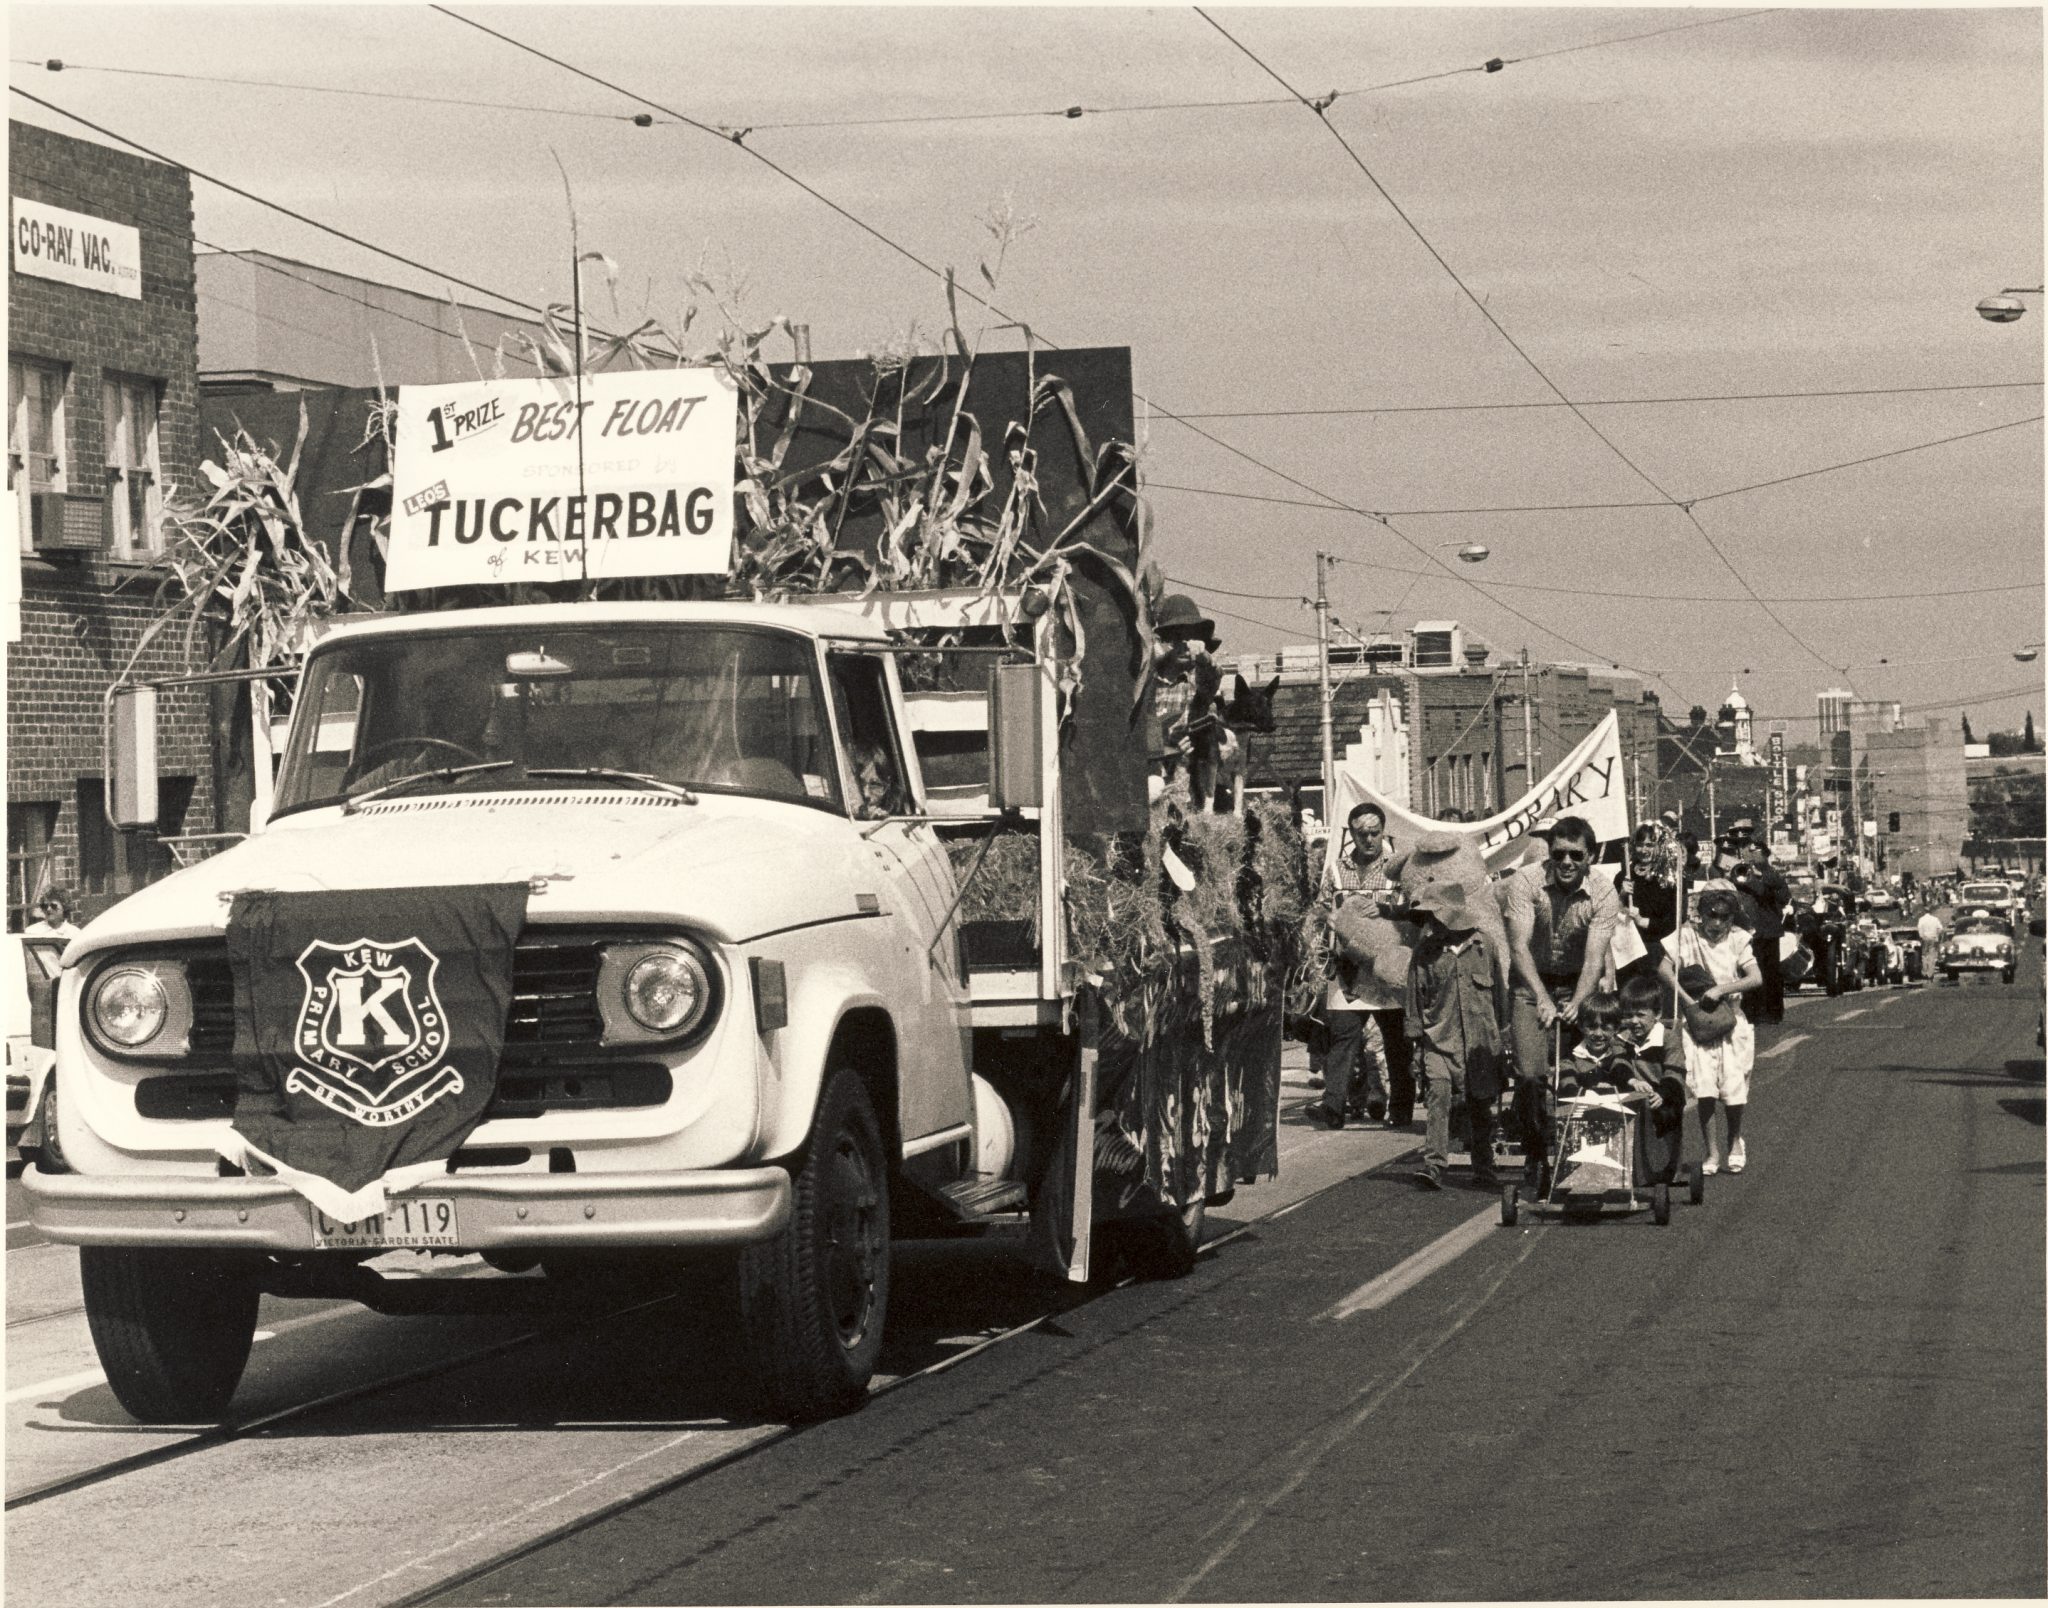 Best Float in Show. C. 1990. Photo Source - Kew Historical Society